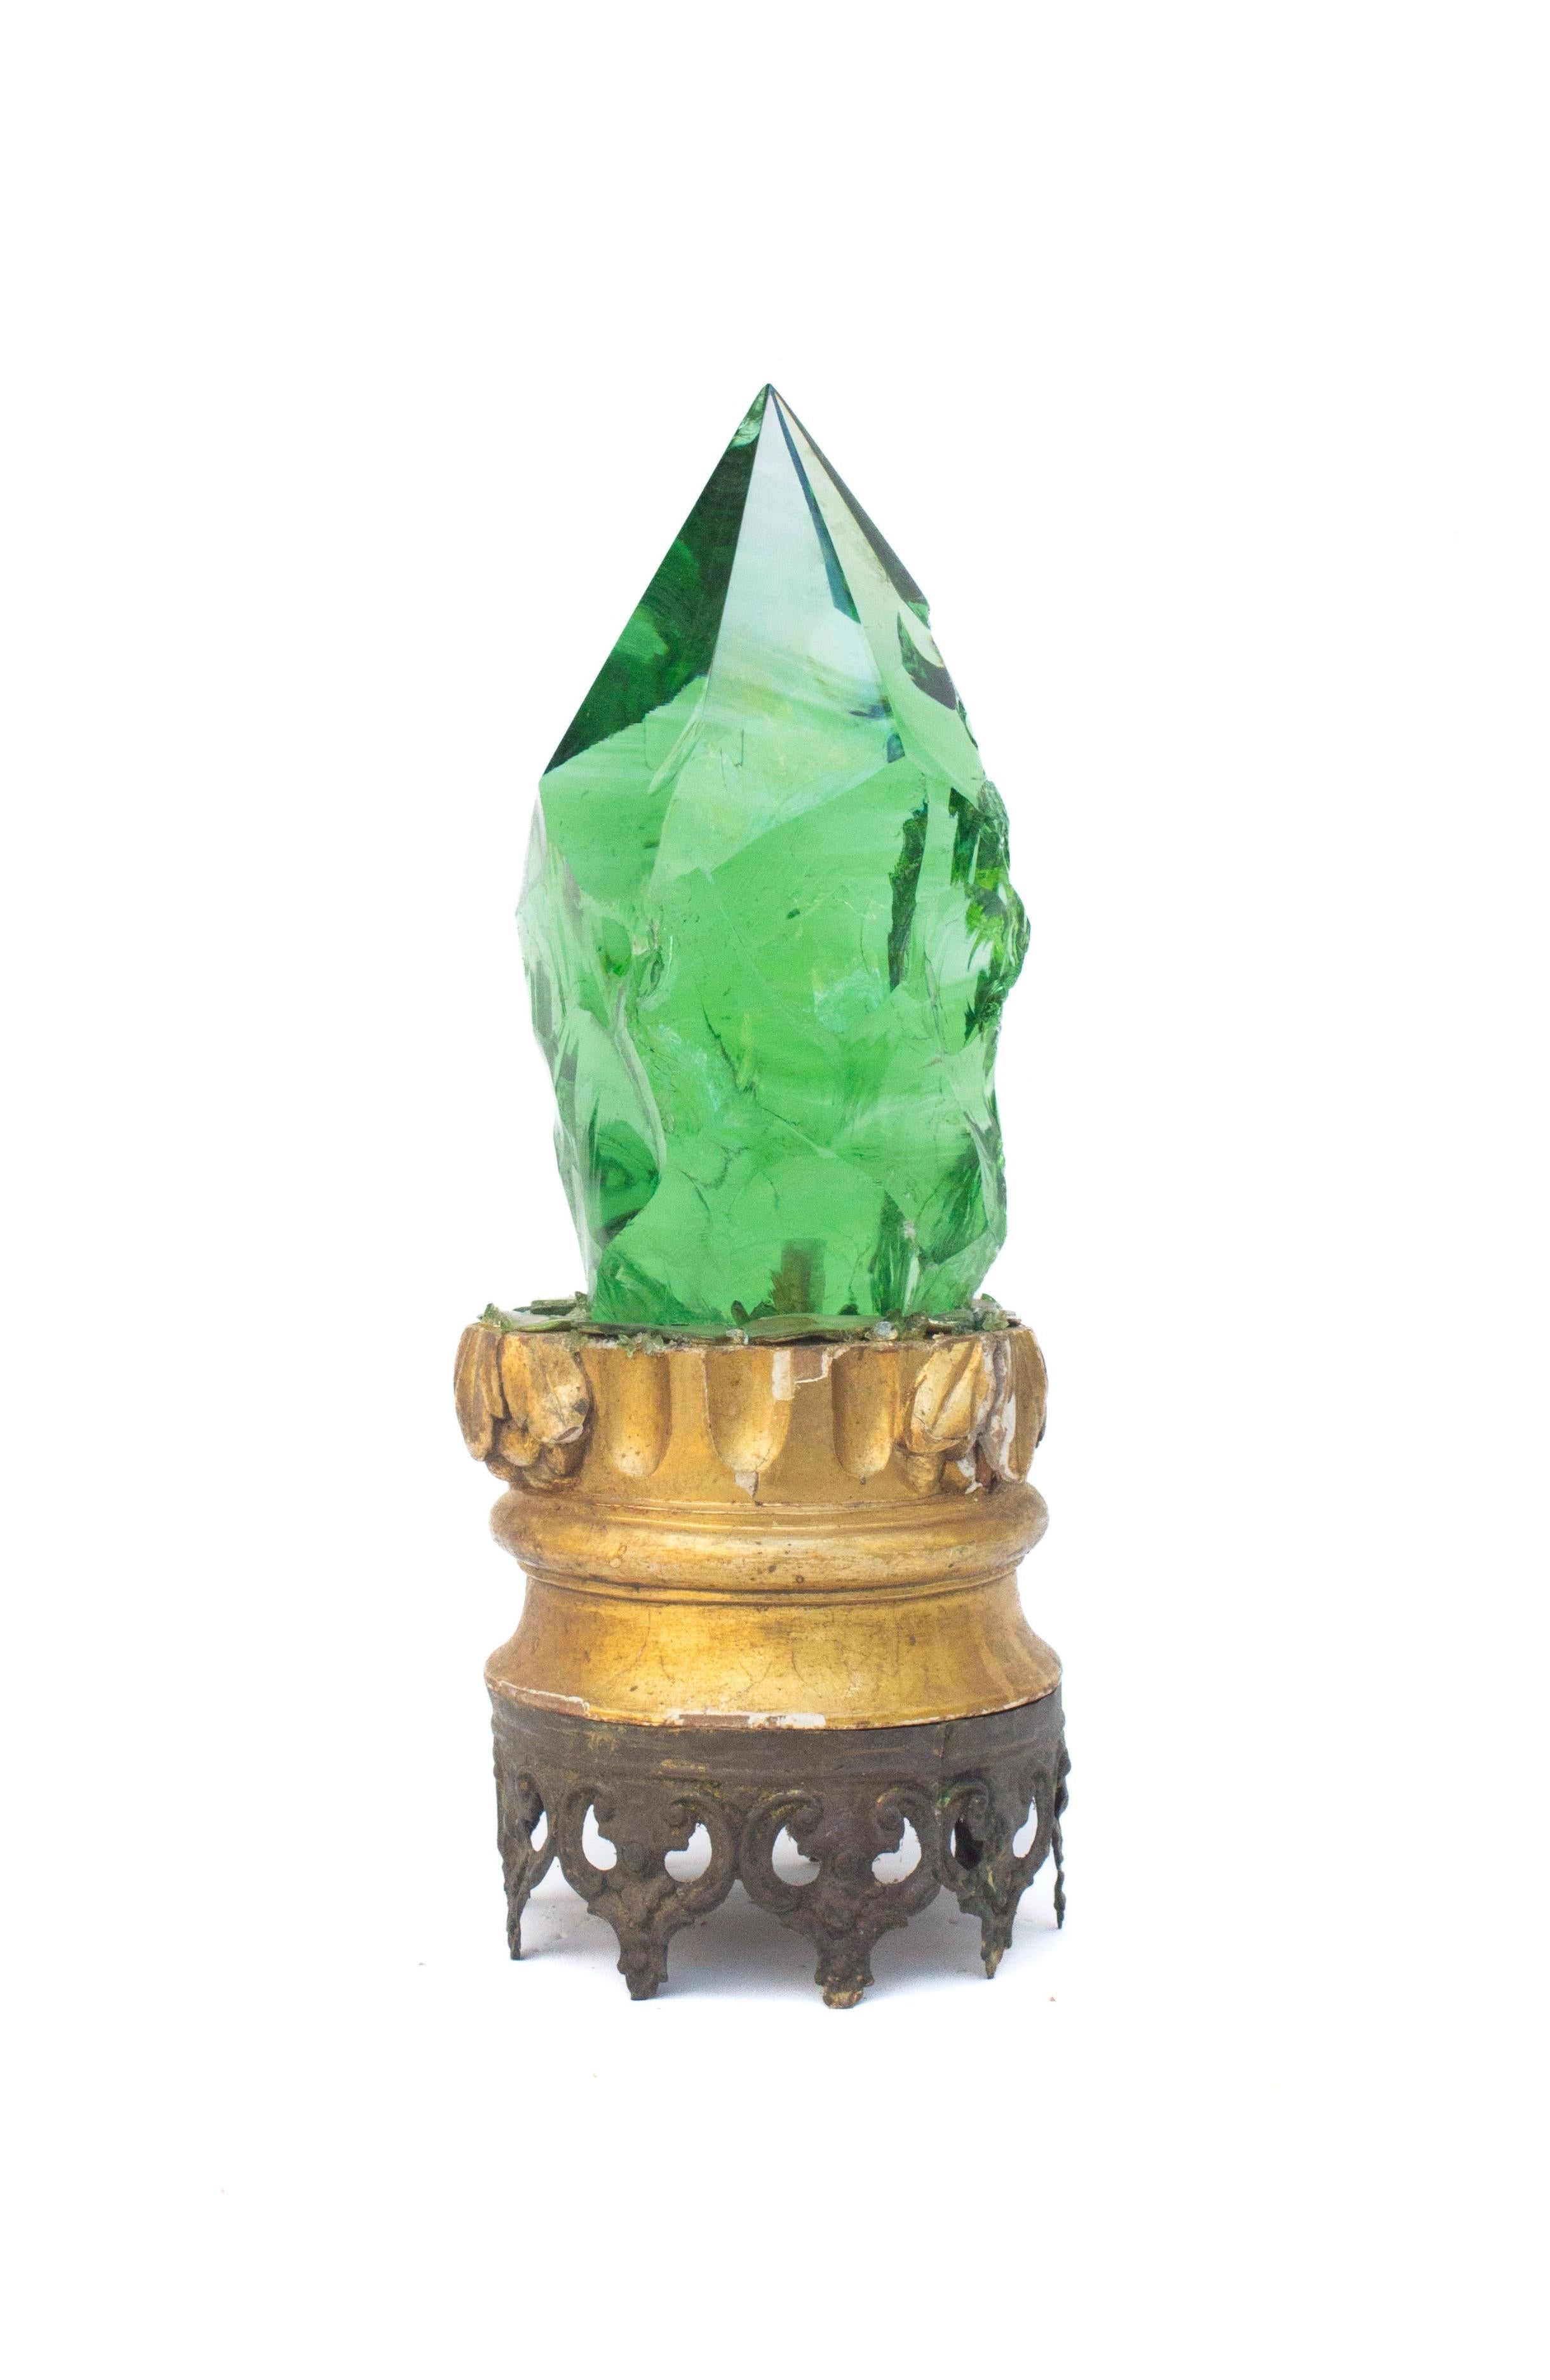 18th century Italian gilded base with a polished green lava glass point and adorned with green mother of pearl with gold highlights and mounted on an antique metal crown base.

The gilded base originally came from a historical church in Italy. The